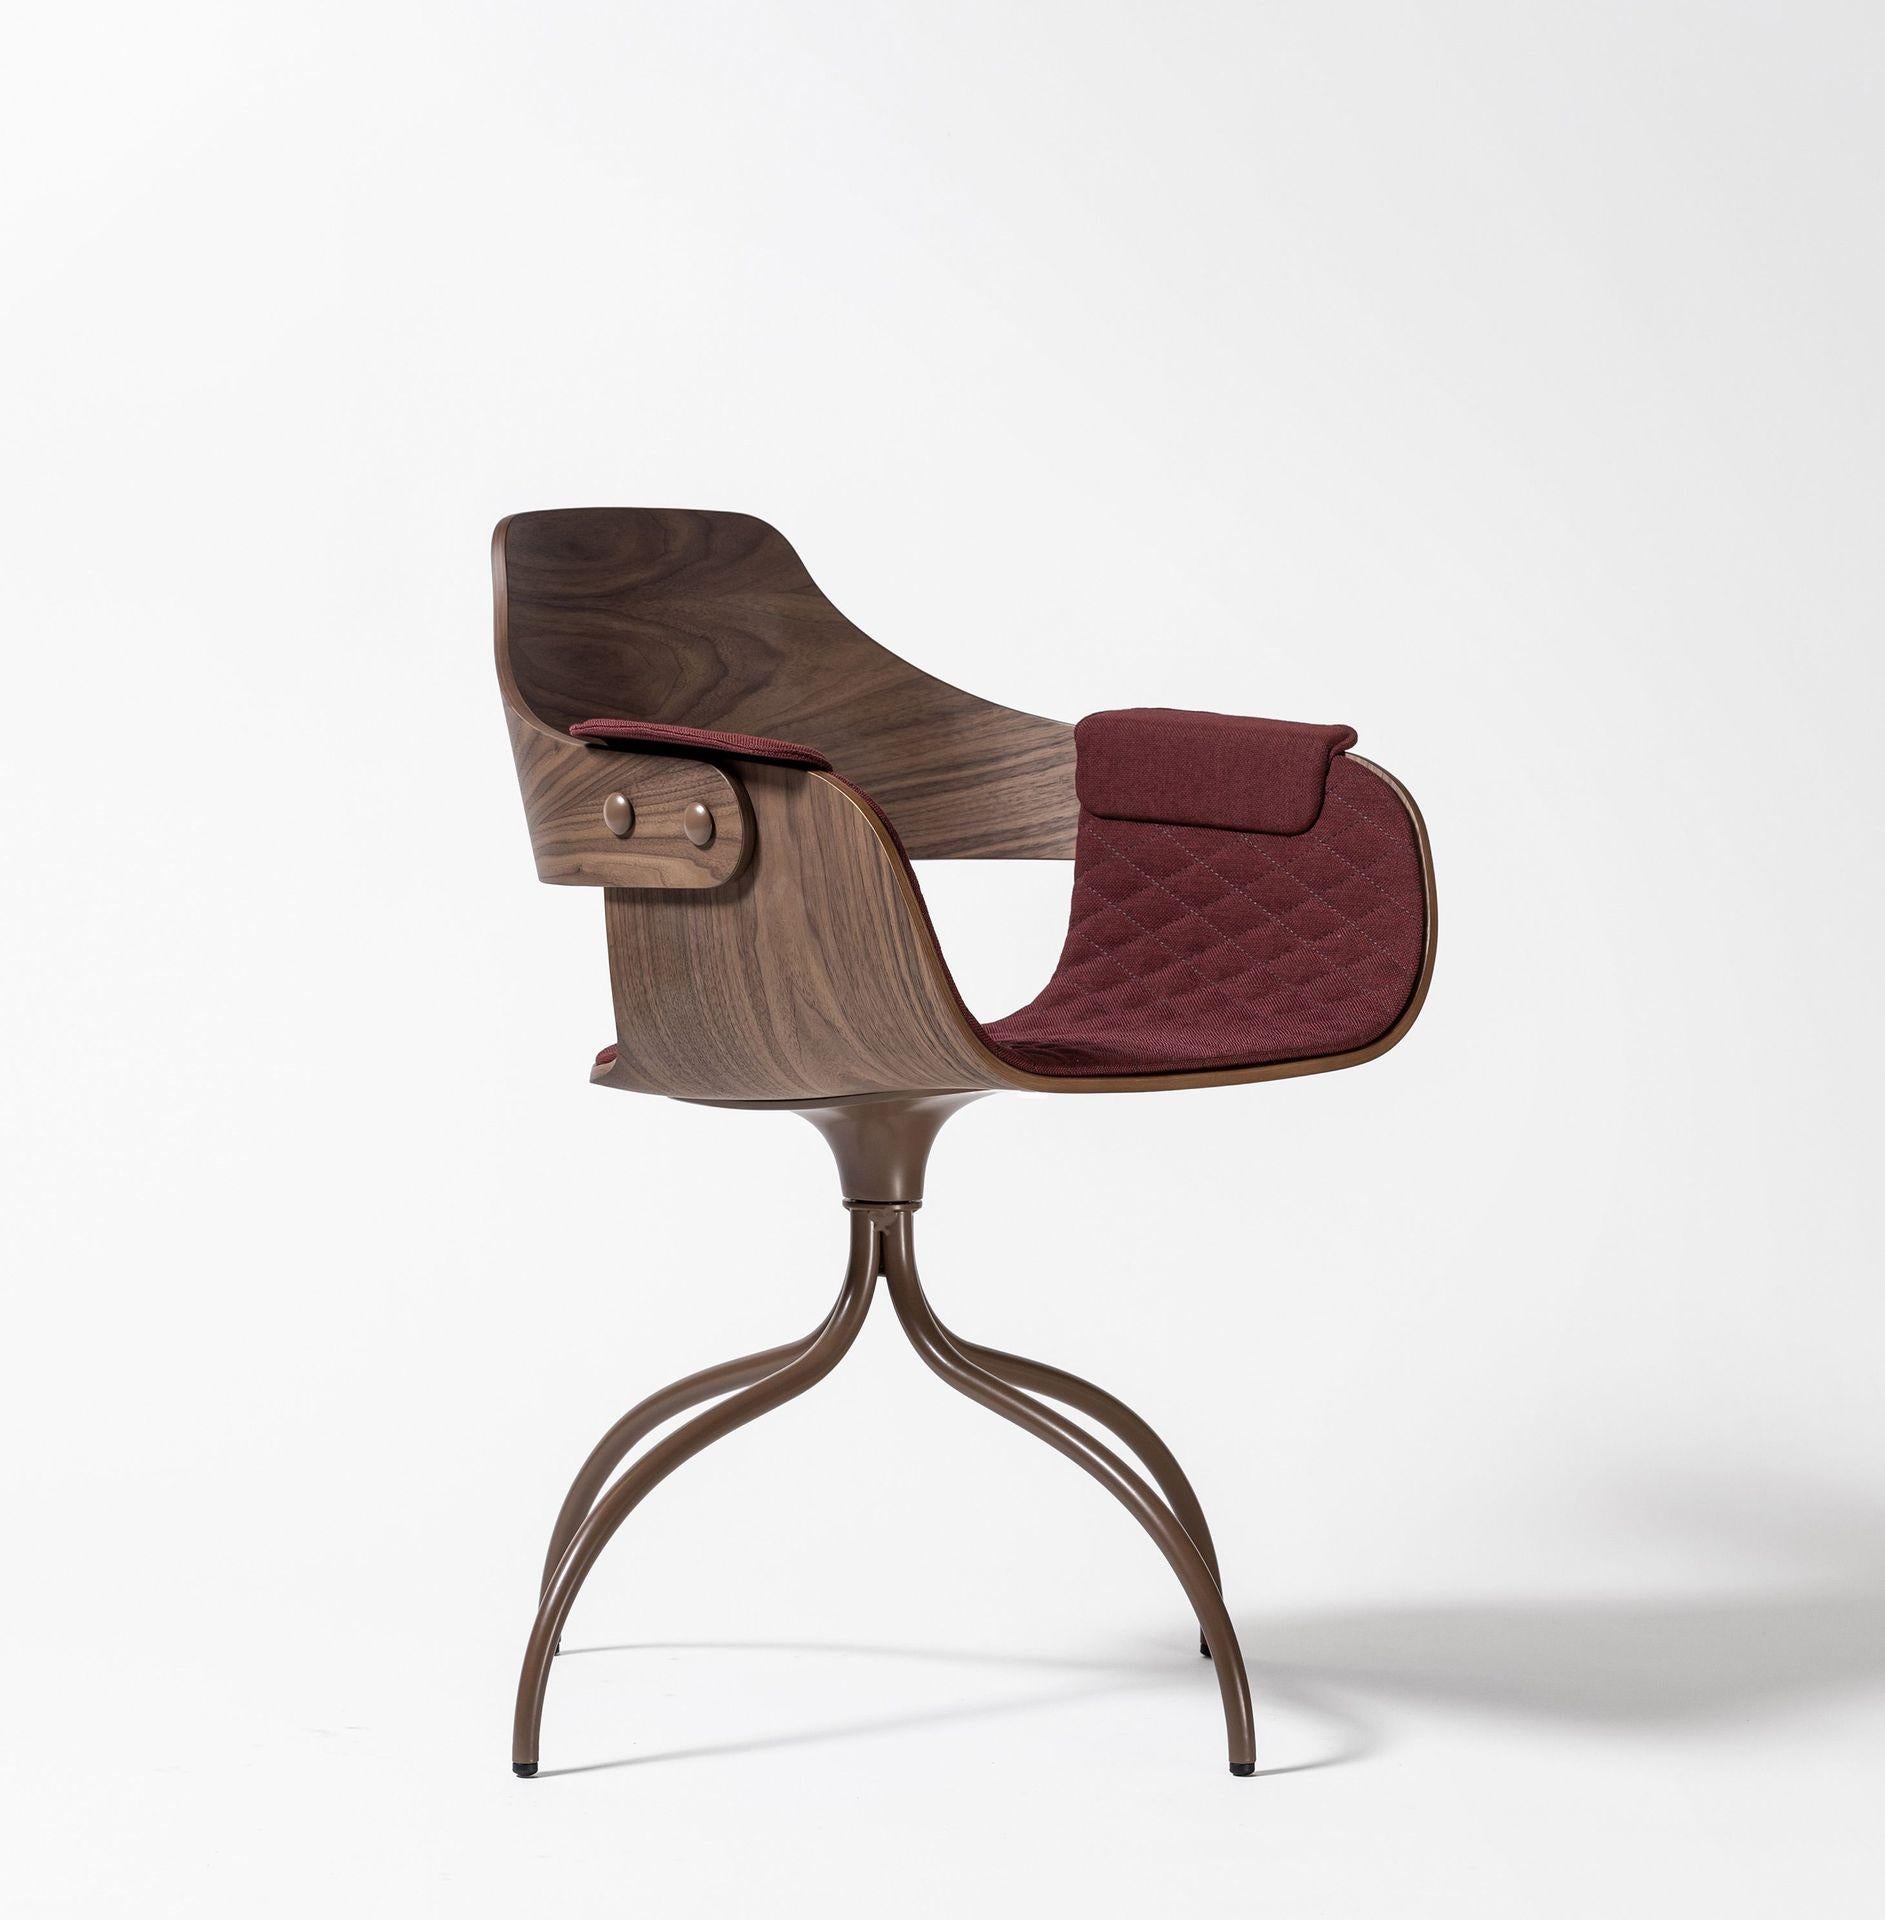 Powder-Coated Swivel Base Showtime Brown Chair by Jaime Hayon